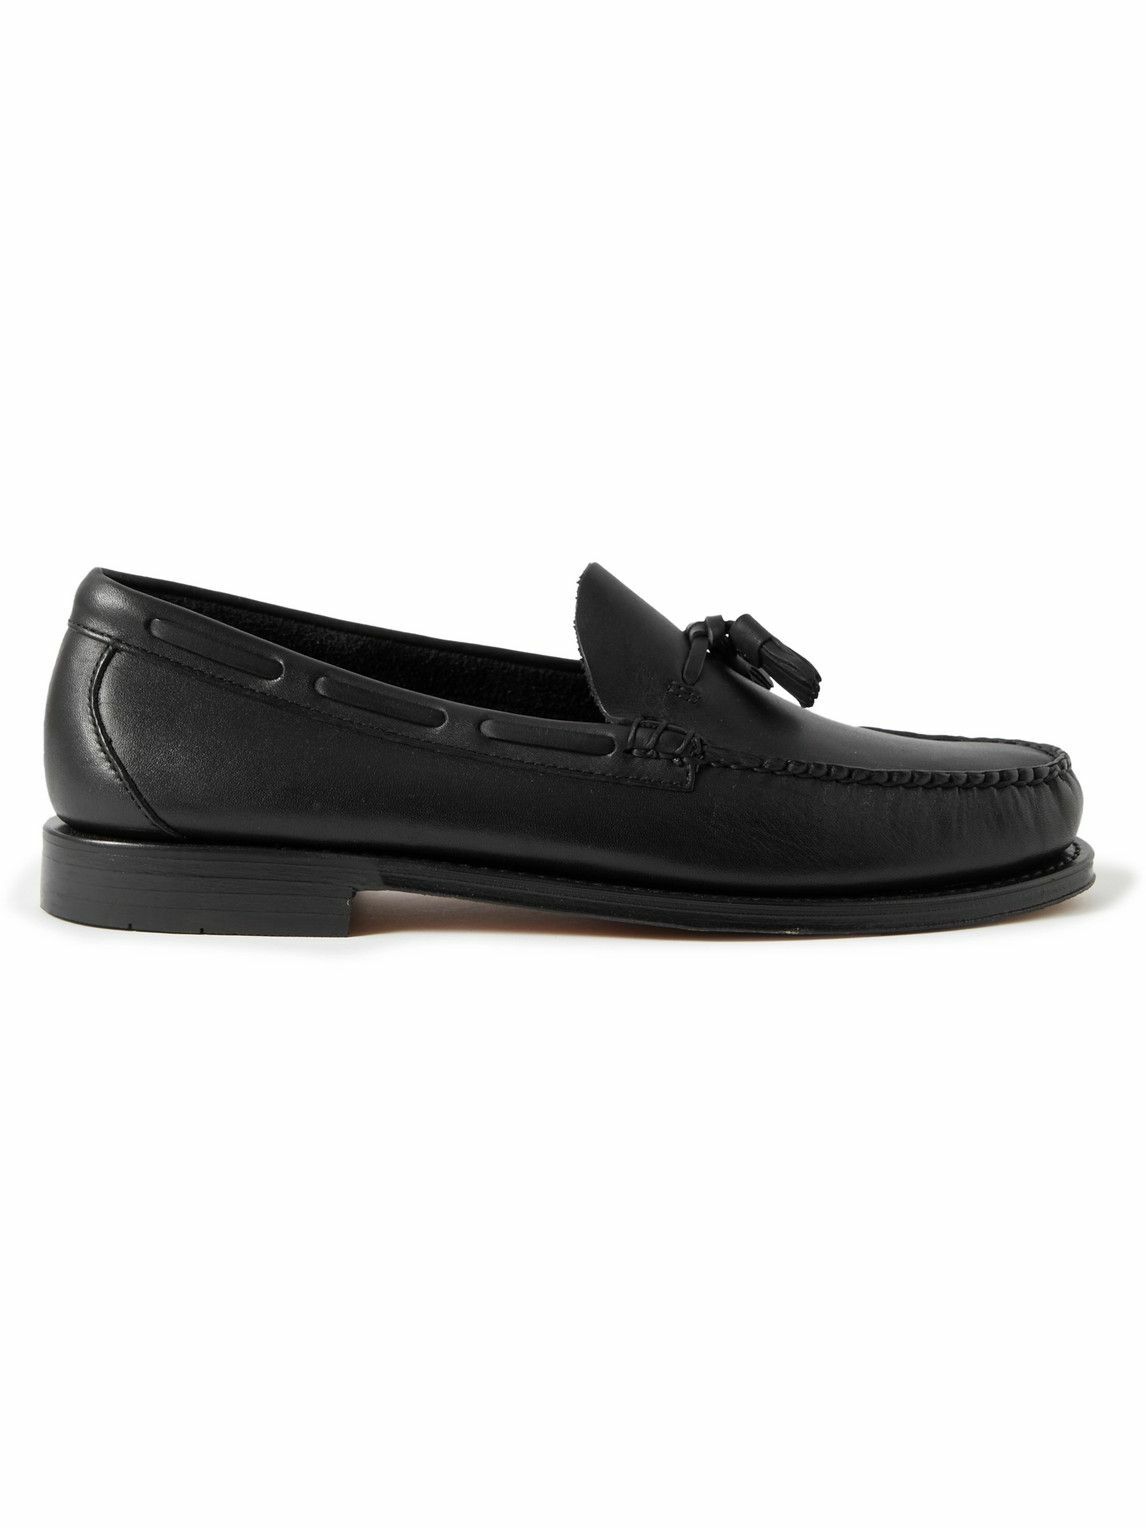 G.H. Bass & Co. - Weejuns Heritage Larkin Leather Tasselled Loafers ...